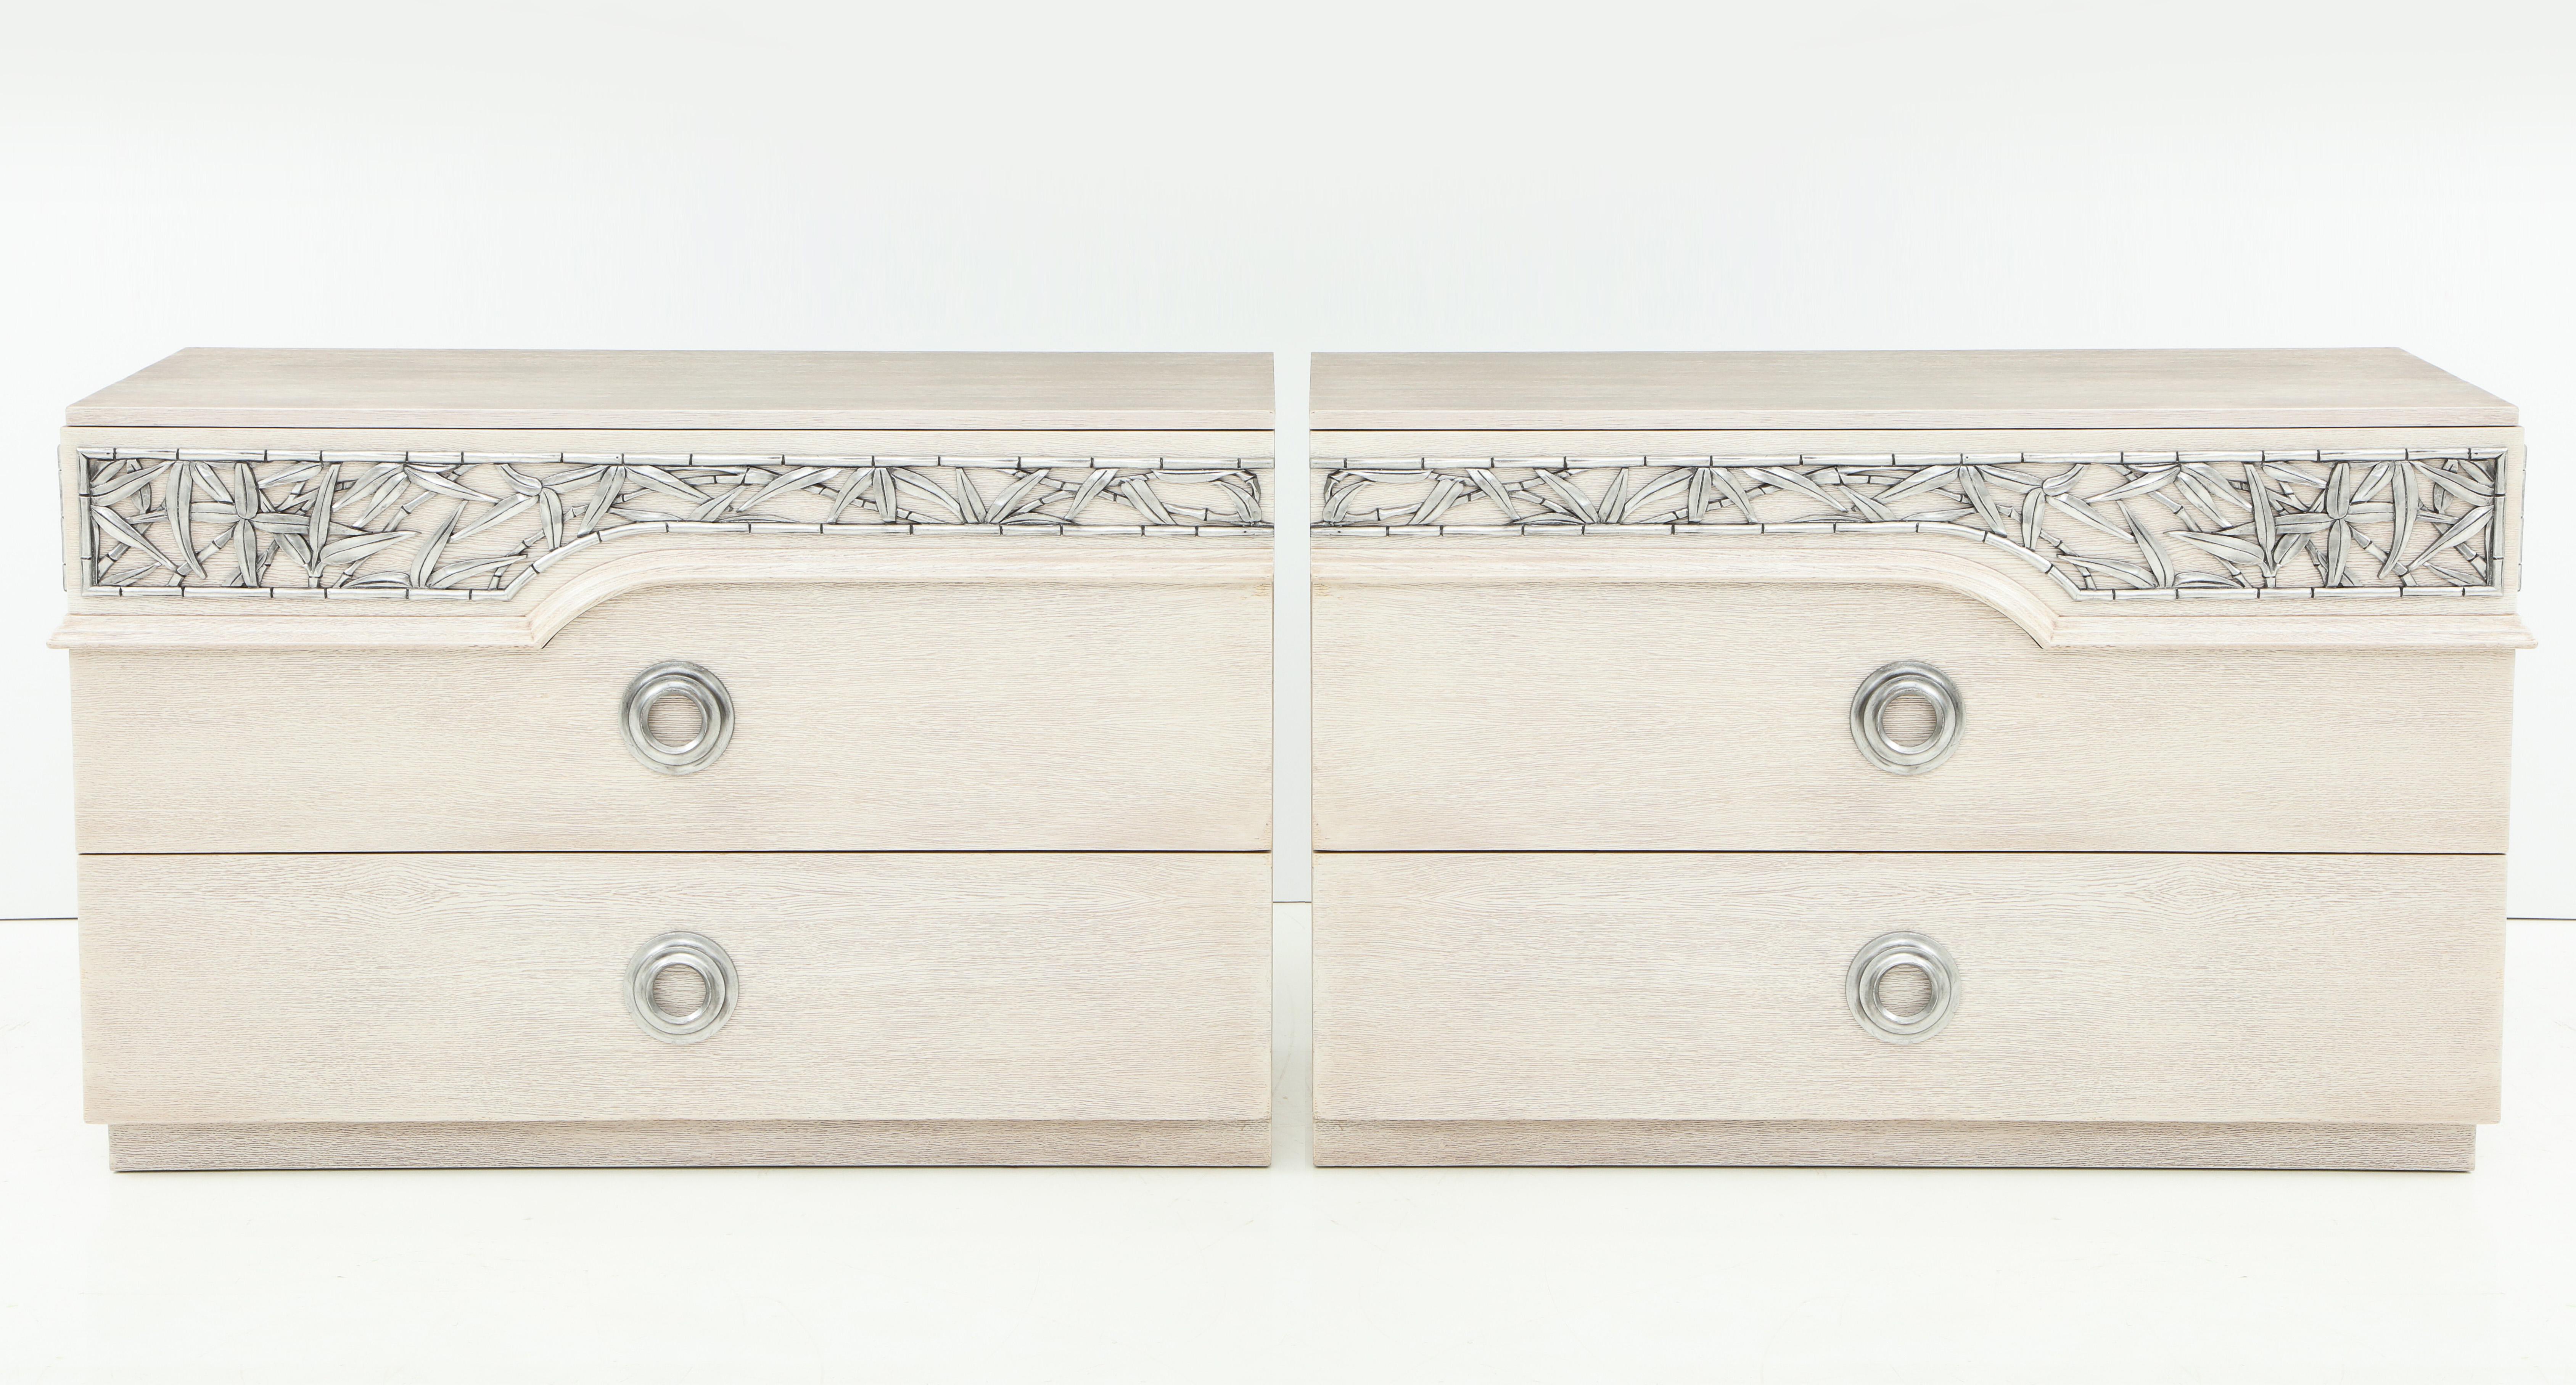 Pair of mint restored bleached/cerused oak dressers with chinoiserie inspired carved bamboo trim with an aged silver leaf finish. Stamped James Mont Designs. 
Each chest has 3 drawers. On display at 200 Lexington Avenue, 10th floor.